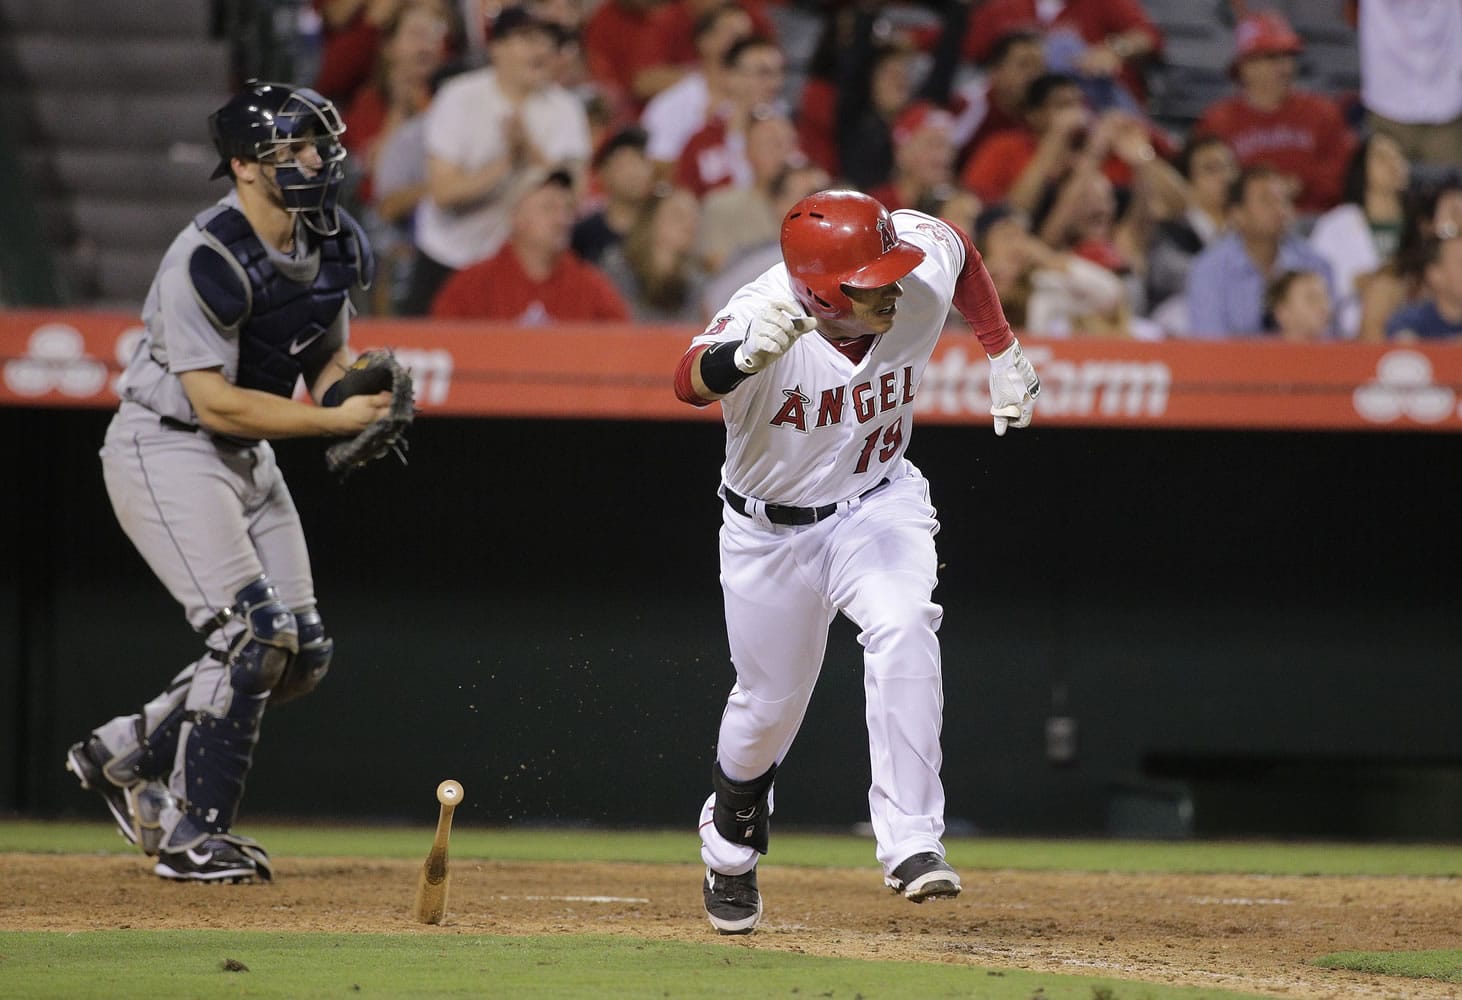 Los Angeles Angels' Efren Navarro hits a walk-off single during the 16th inning against the Seattle Mariners in the wee hours Saturday, in Anaheim, Calif. The Angels won 3-2. (AP Photo/Jae C.